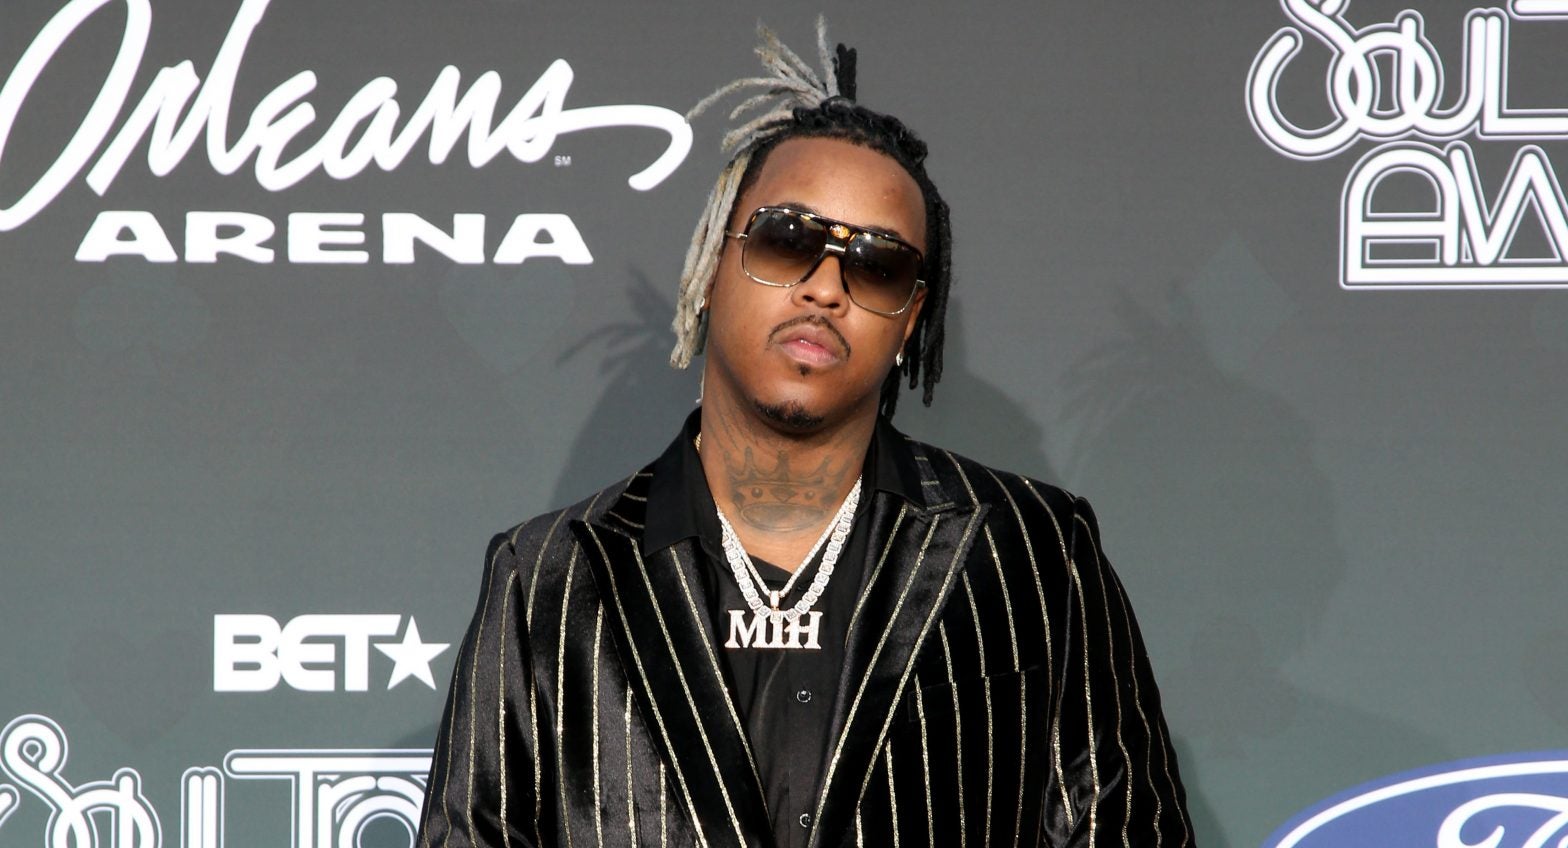 Jeremih Had To Learn To Walk Again After COVID-19 Diagnosis